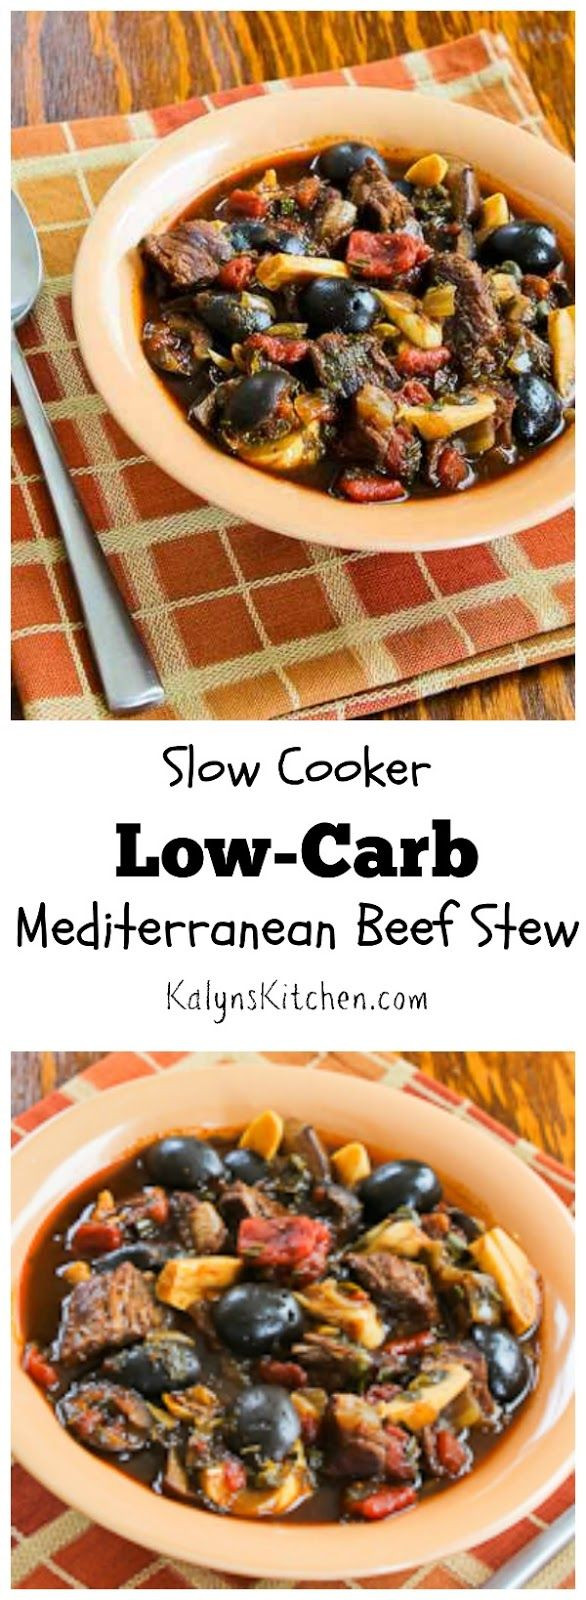 Low Carb Beef Stew Slow Cooker
 Slow Cooker Low Carb Mediterranean Beef Stew with Rosemary